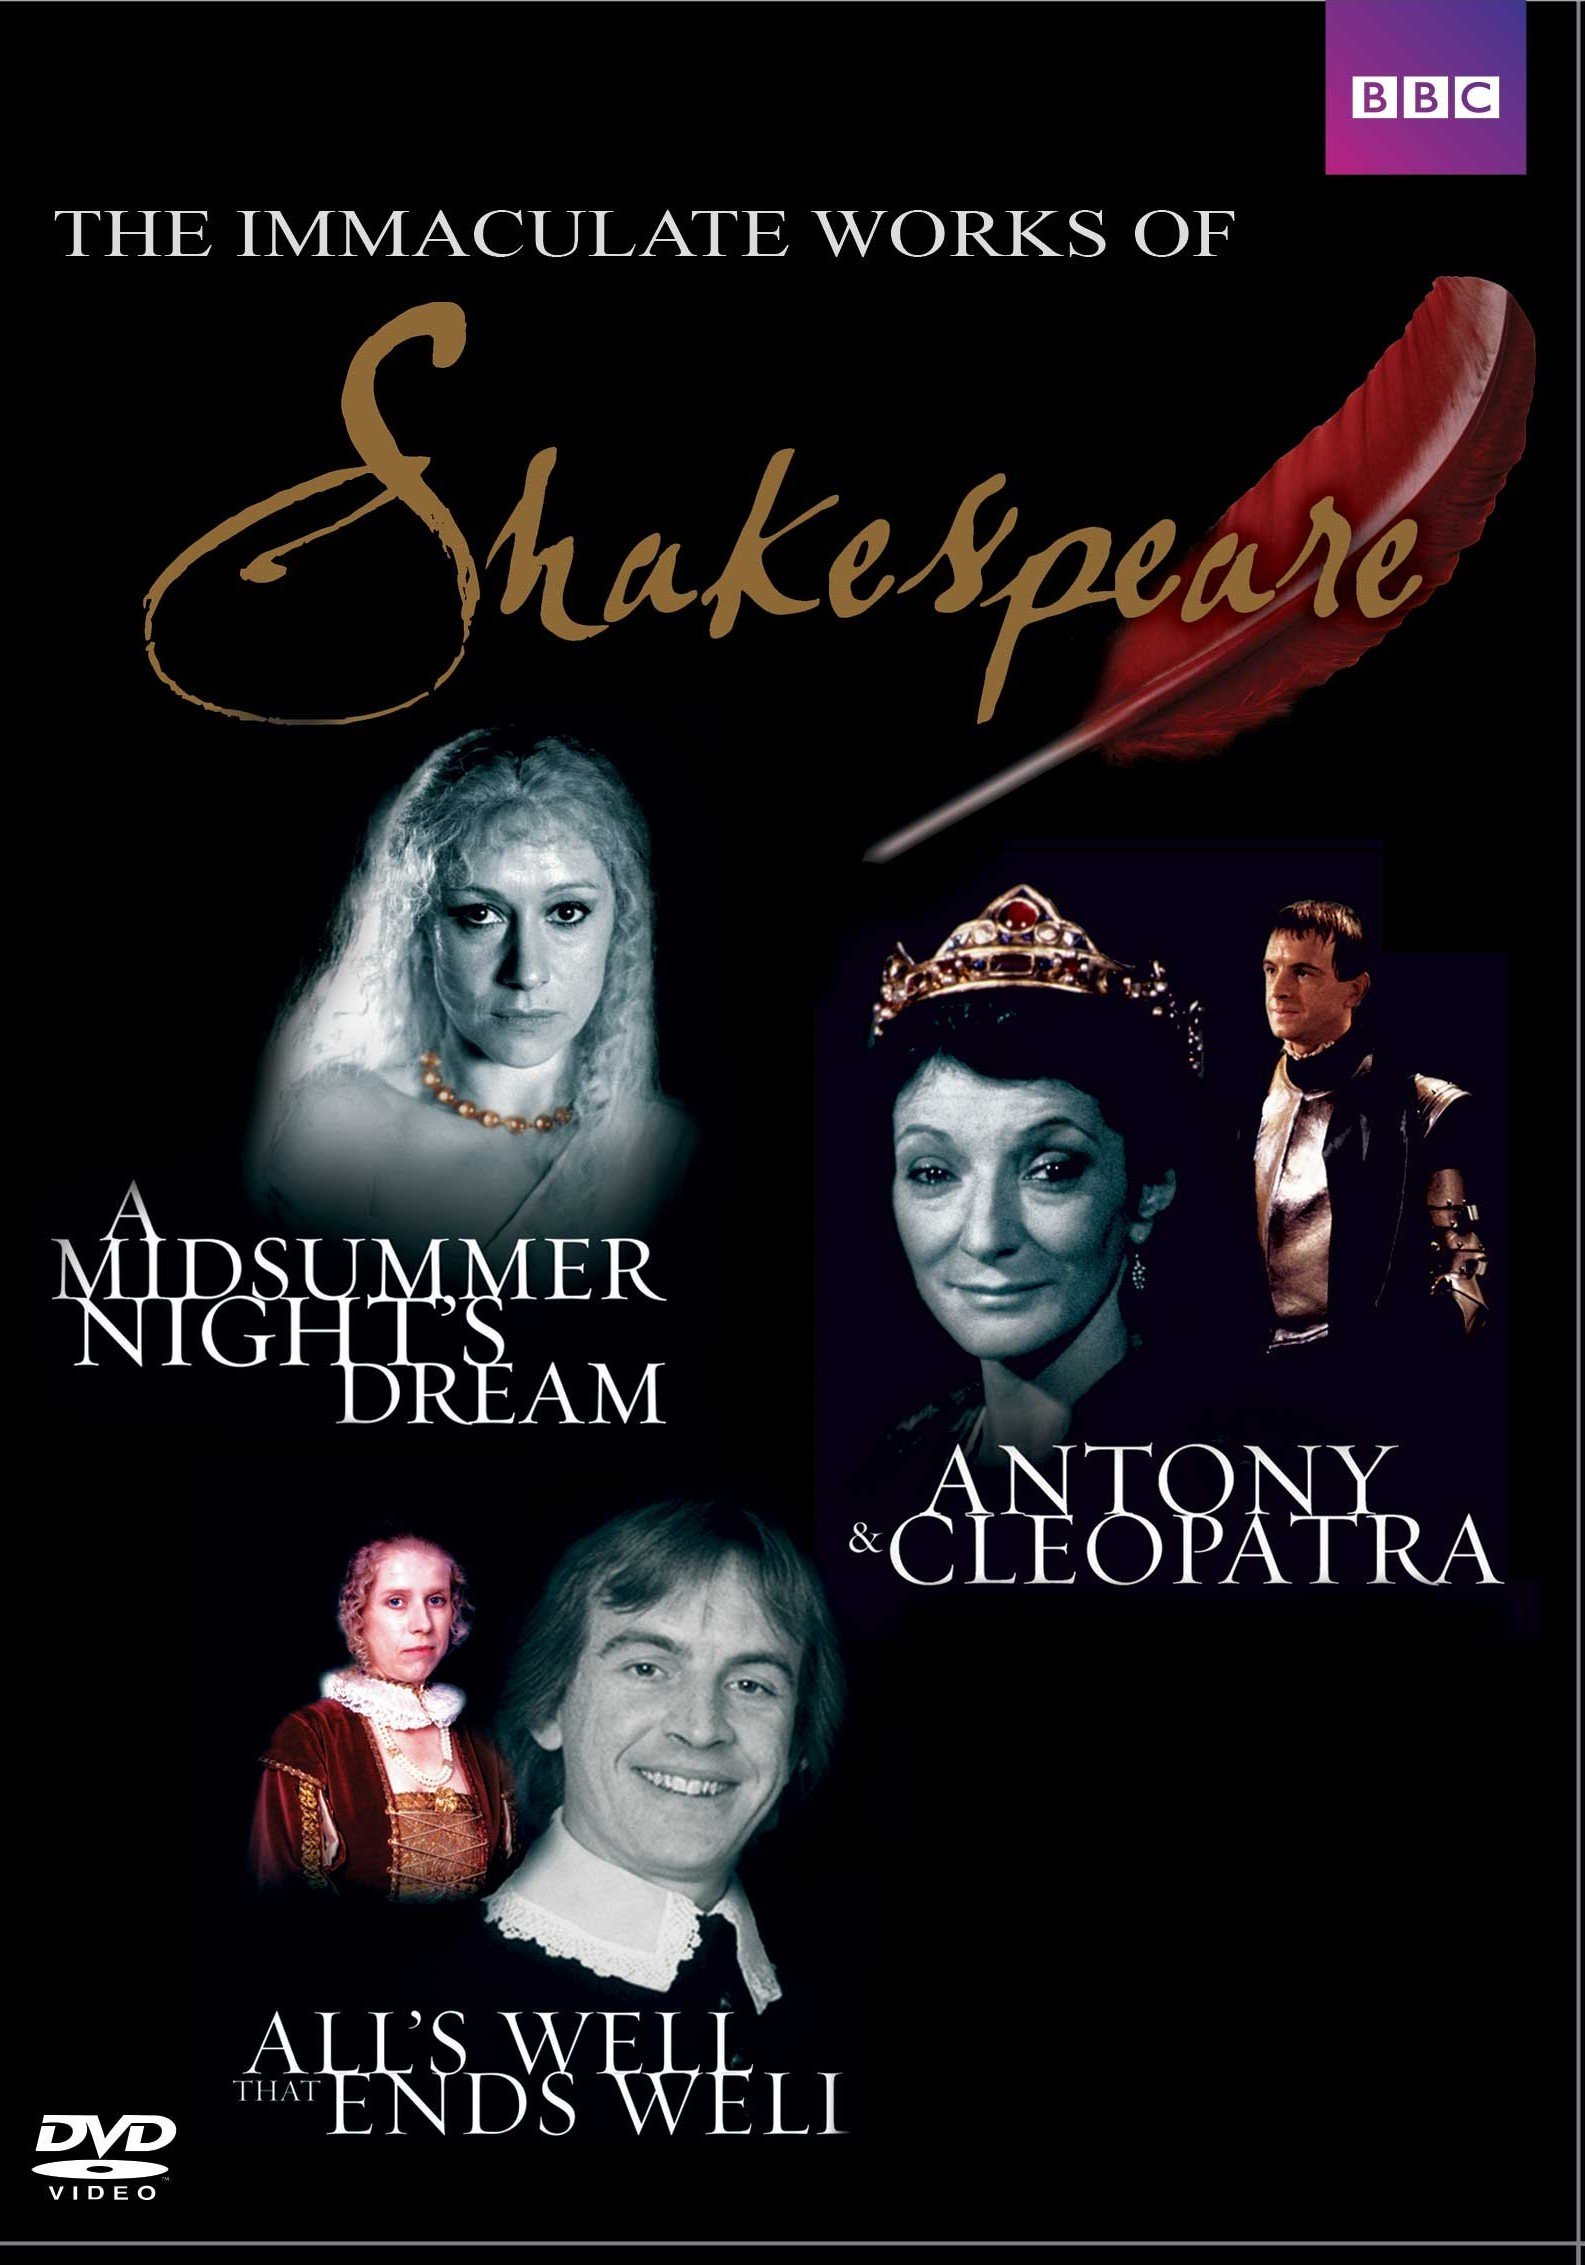 the-immaculate-works-of-shakespeare-vol-1-movie-purchase-or-watch-o